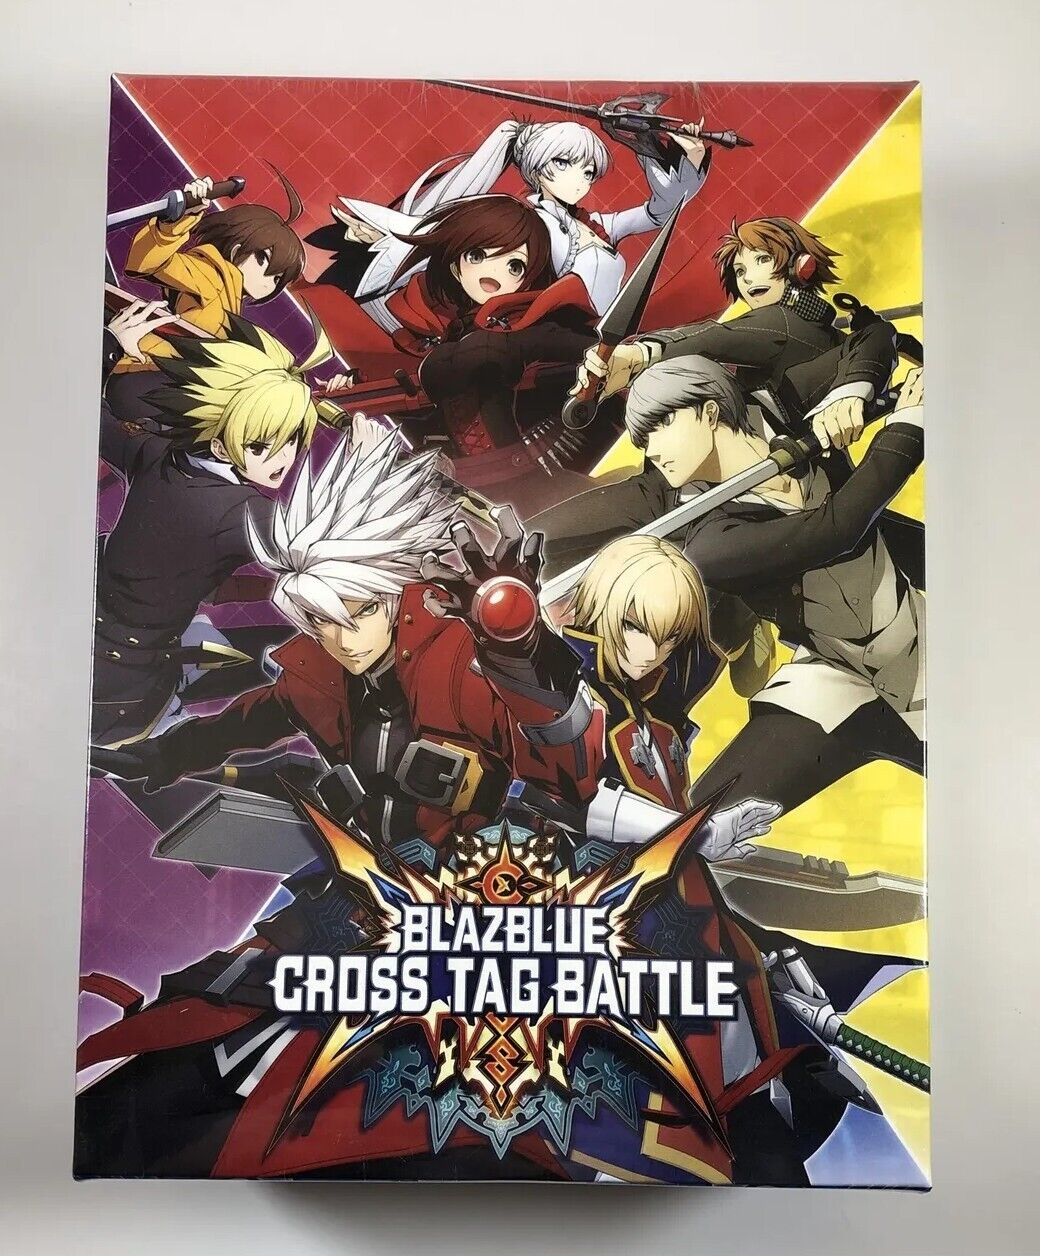 BlazBlue Cross Tag Battle COLLECTOR'S EDITION(Nintendo Switch, 2018) Ships TODAY